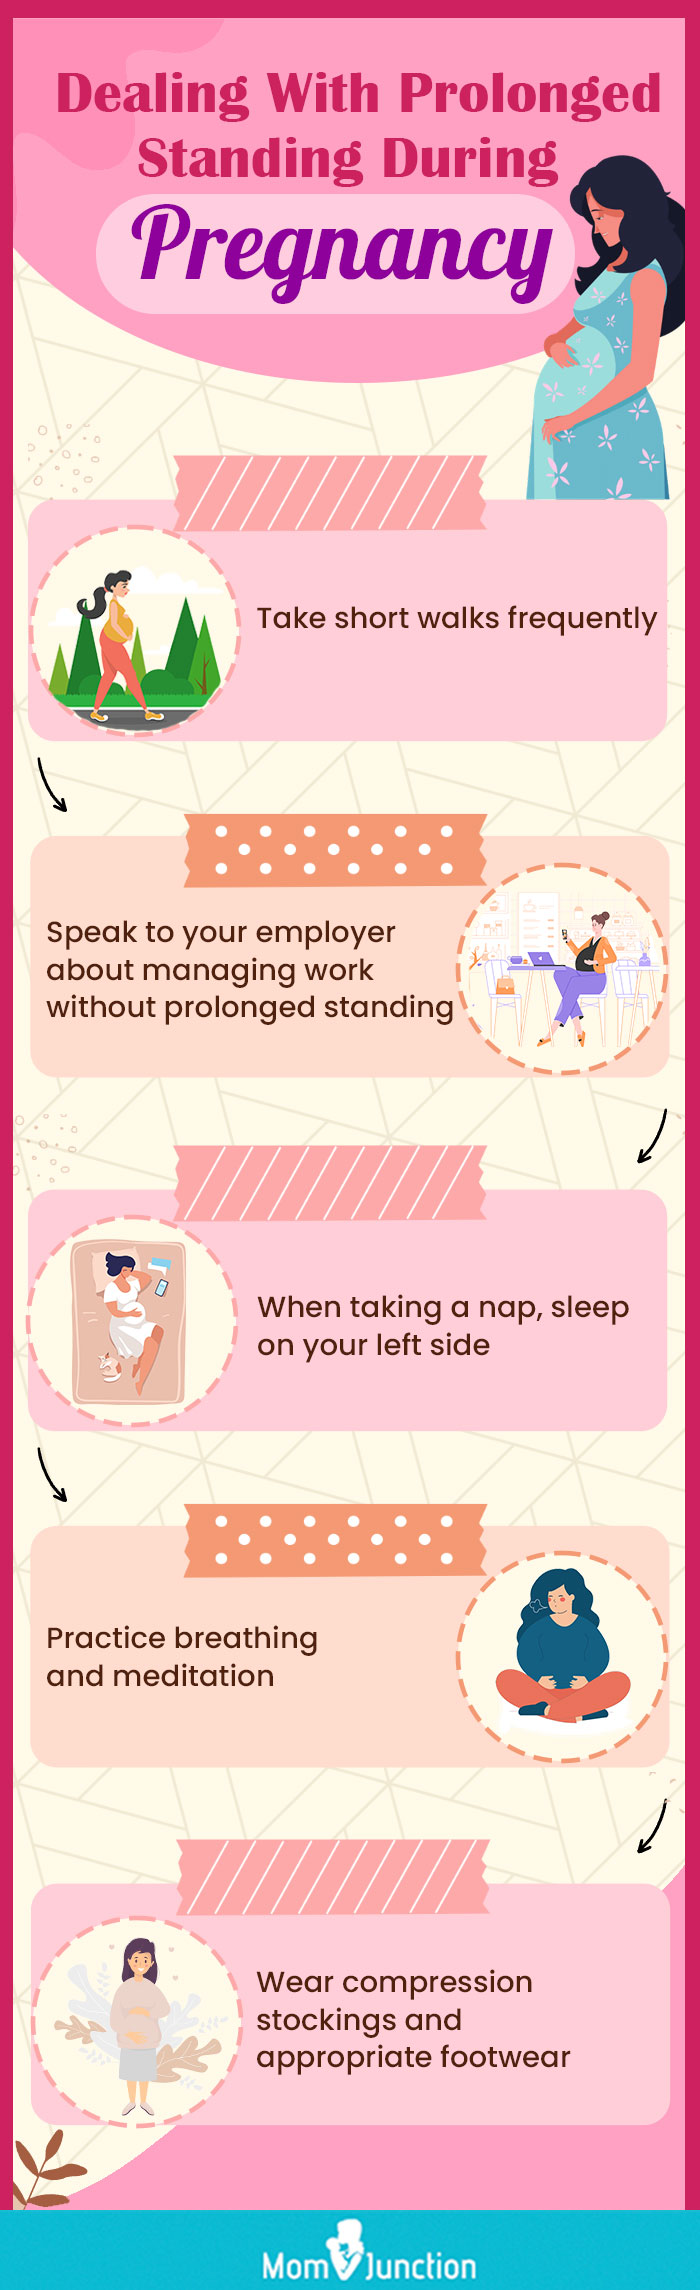 dealing with prolonged standing during pregnancy (infographic)